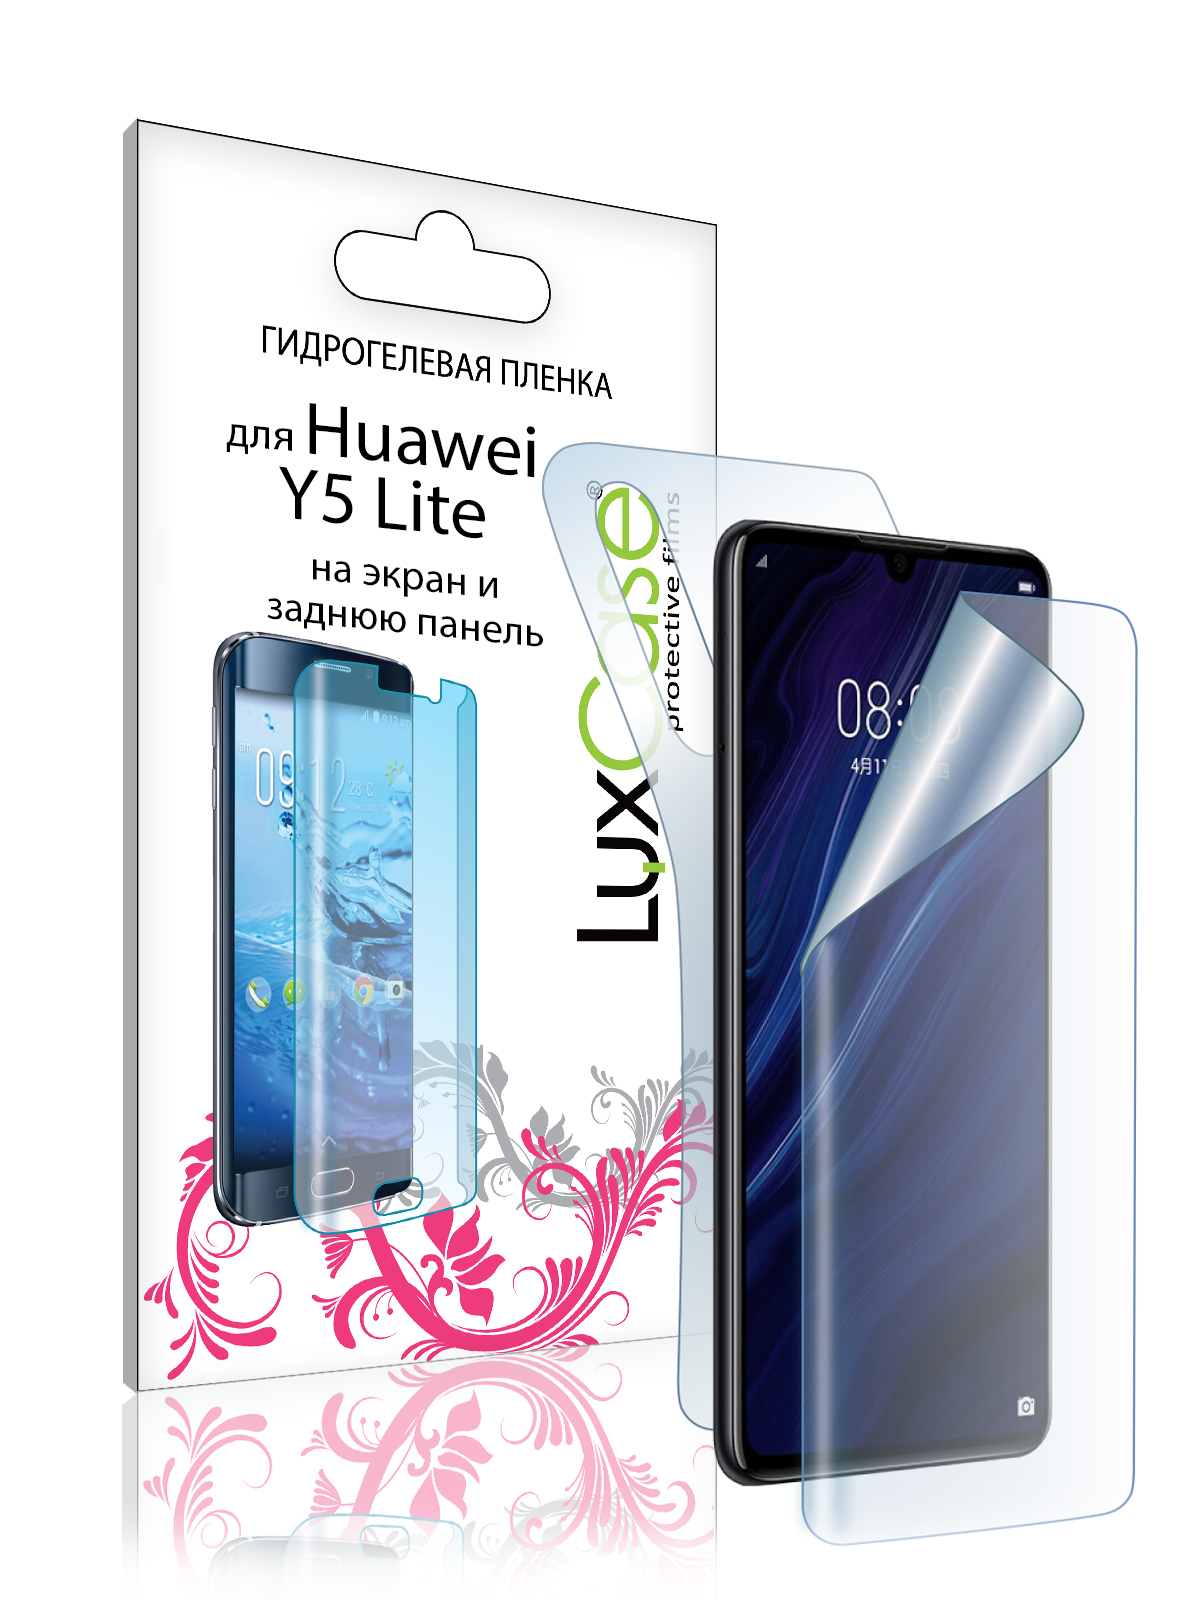 Пленка гидрогелевая LuxCase для Huawei Y5 Lite 0.14mm Front and Back Transperent Huawei Y5 Lite гидрогелевая пленка luxcase для huawei y5 lite 0 14mm front and back matte 86764